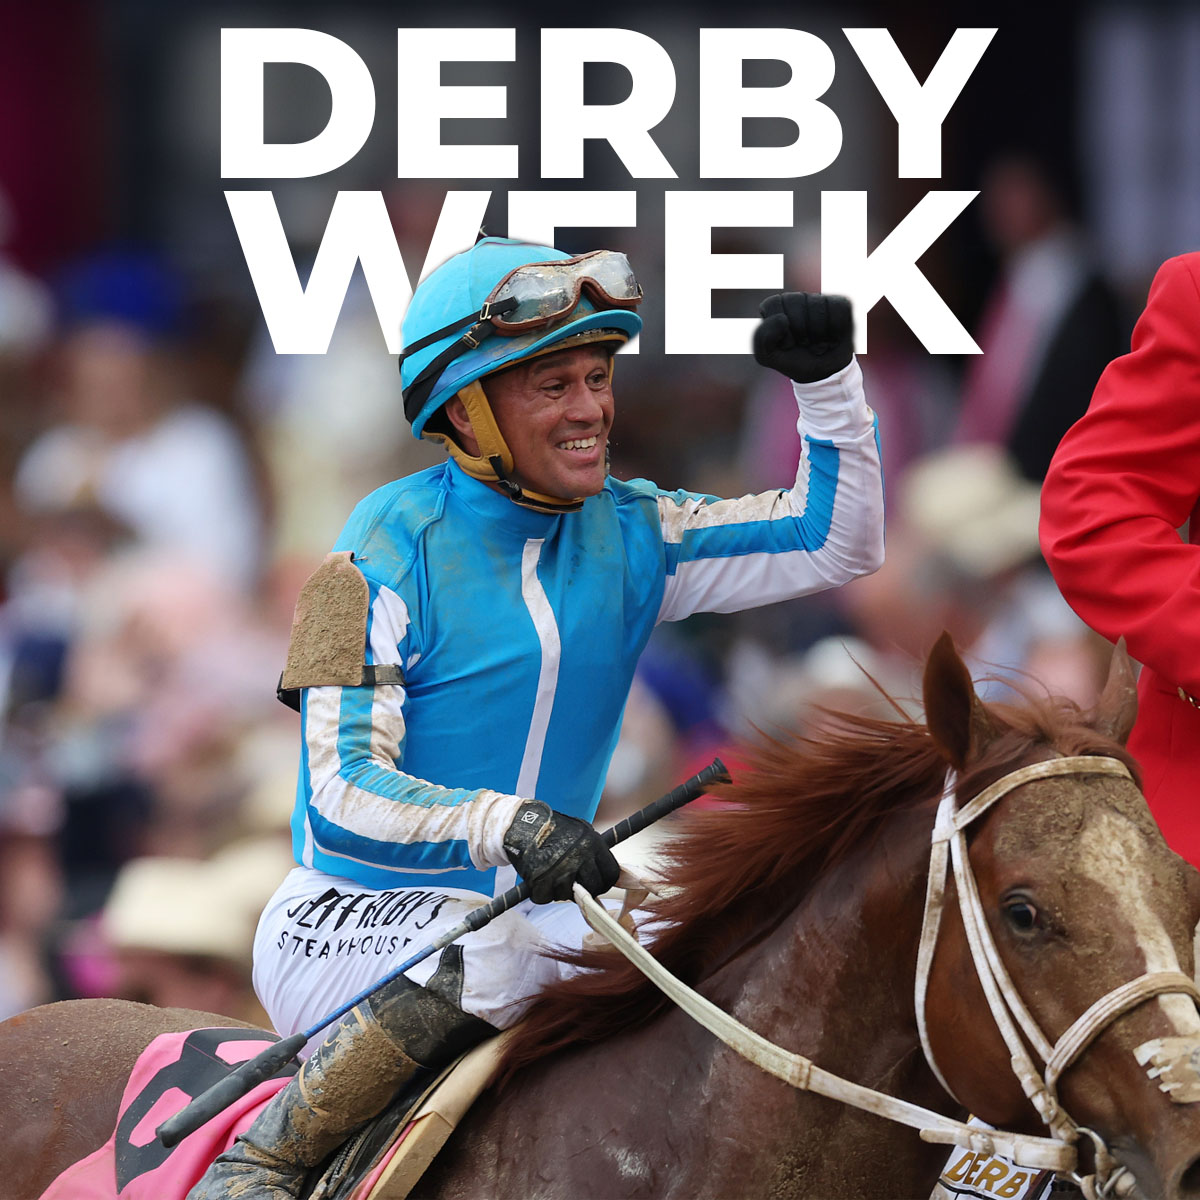 150 YEARS of HISTORY
We hope you enjoyed the Derby Week activities in and around Louisville this week, and we wish you a great Derby Weekend! Now, off to the races!

#louisville #derbyweek #kentuckyderby #150years